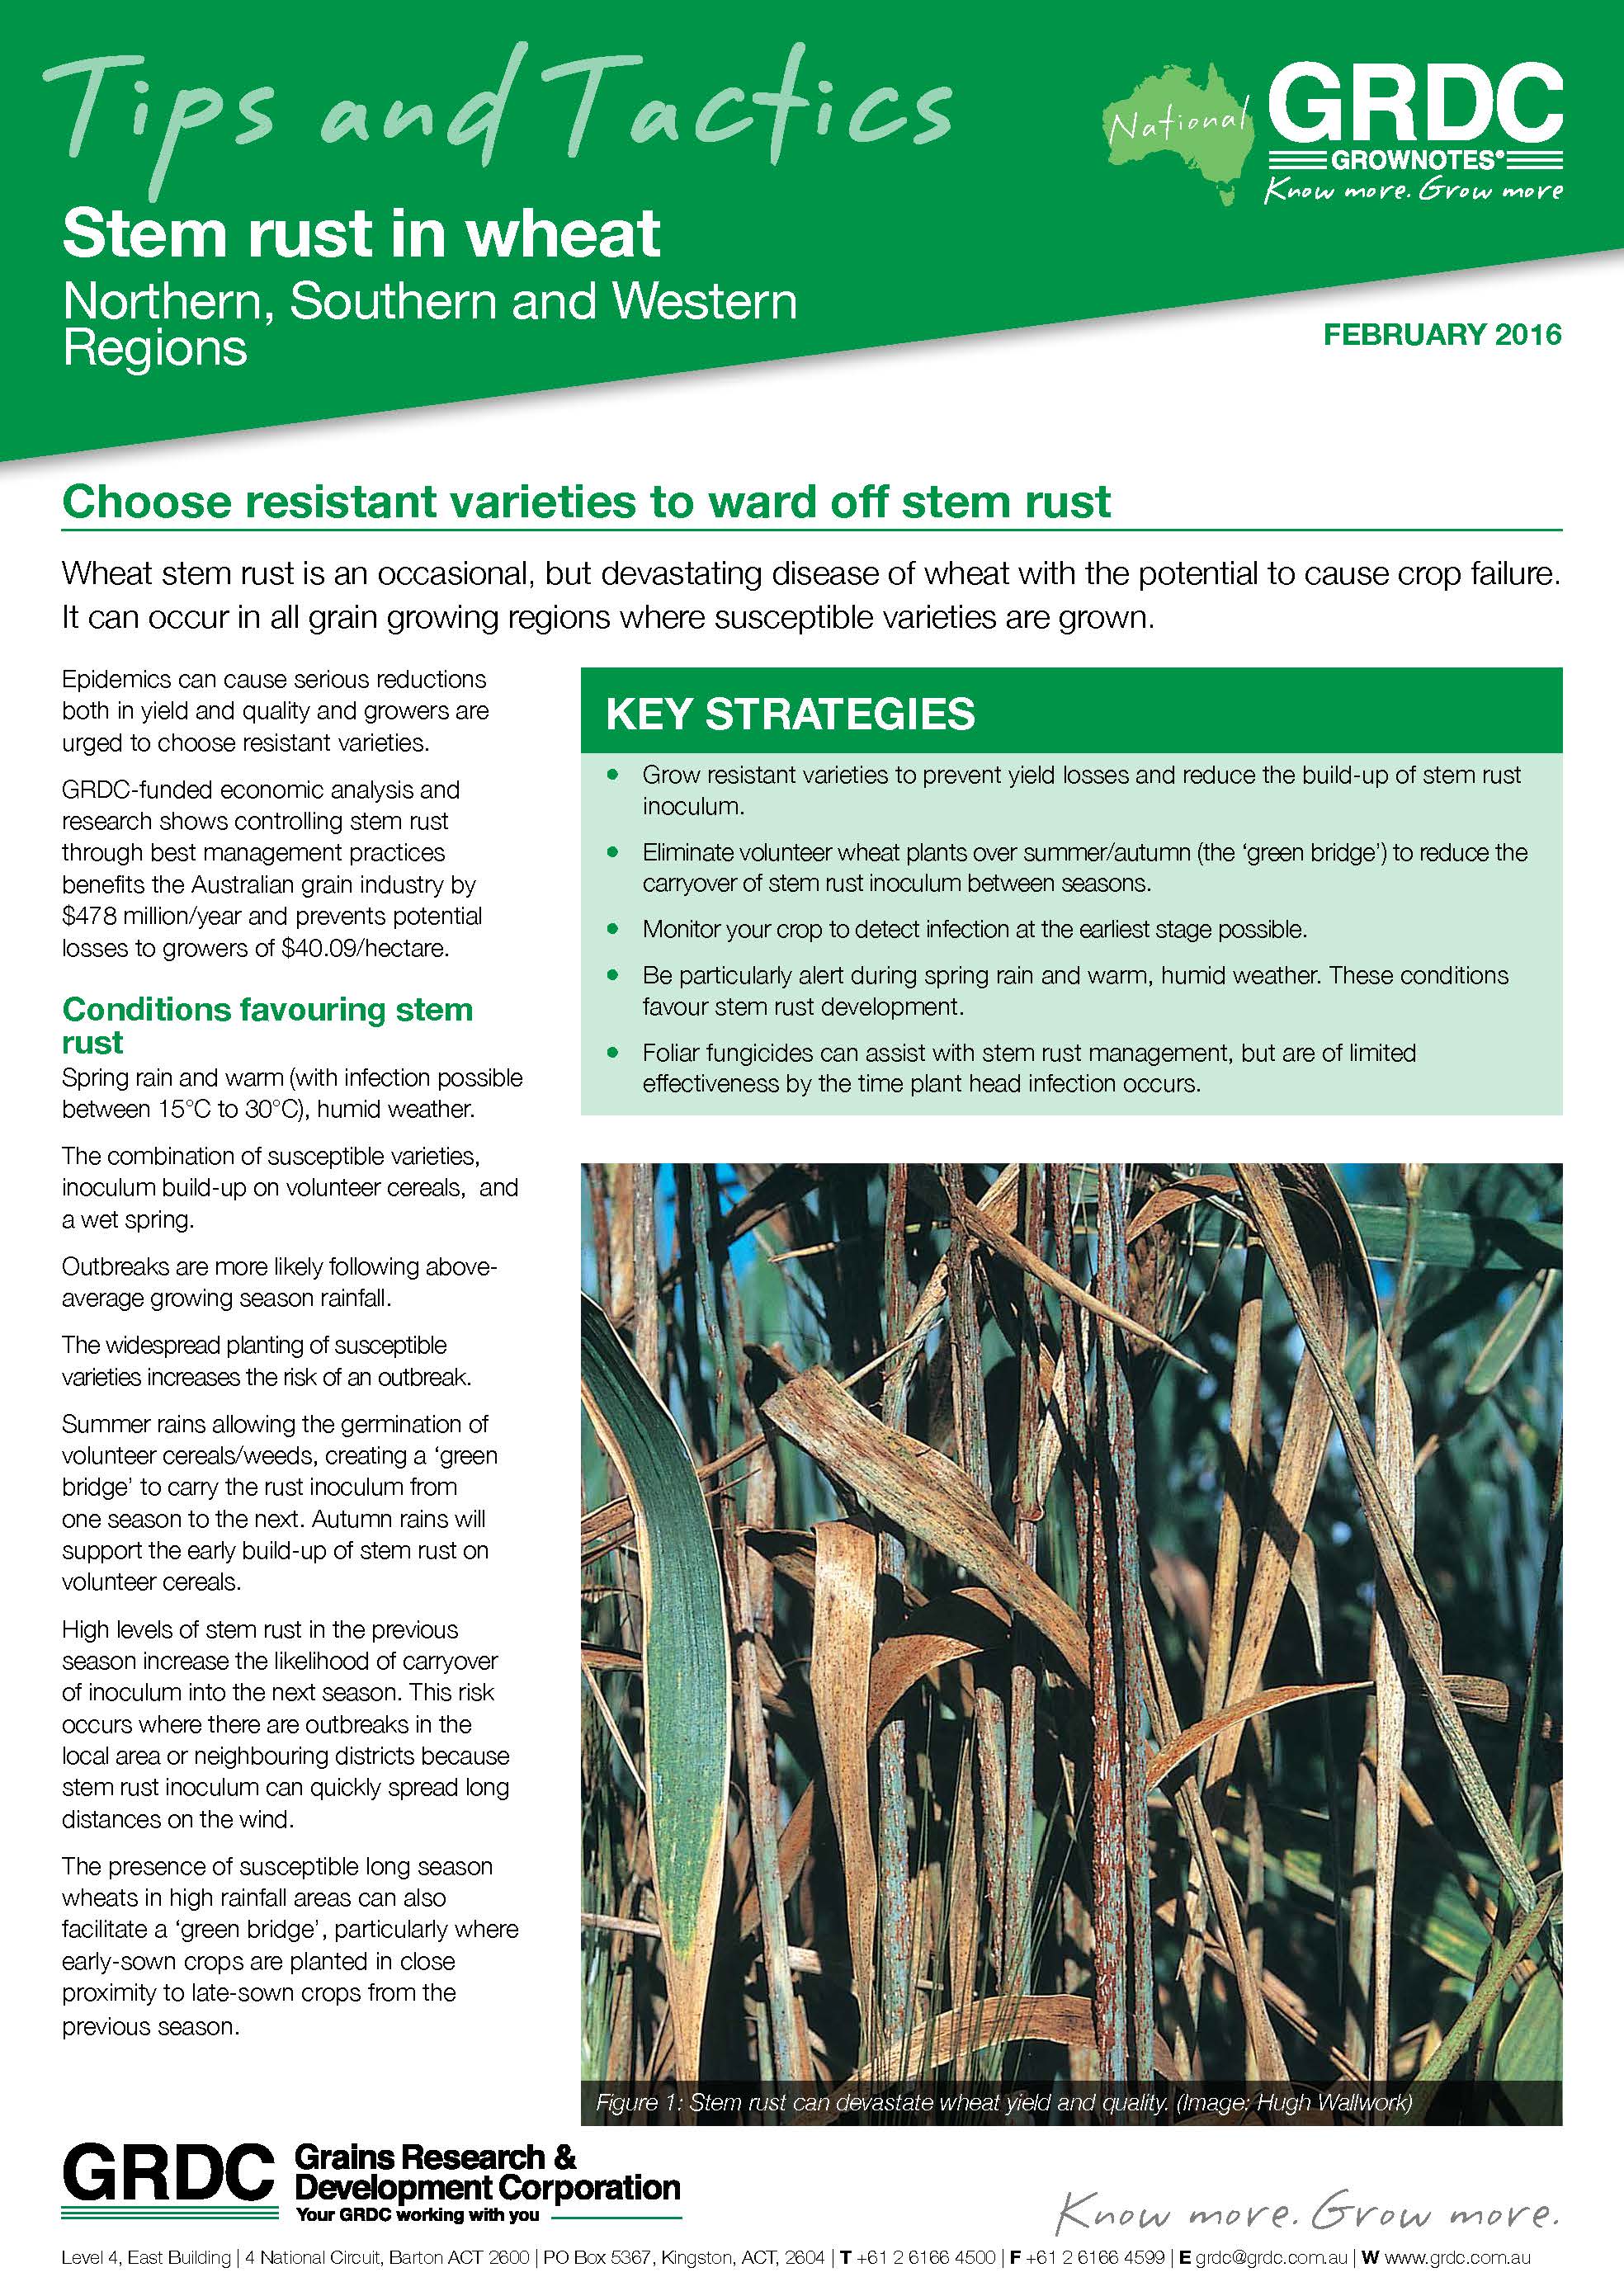 A GRDC magazine cover page